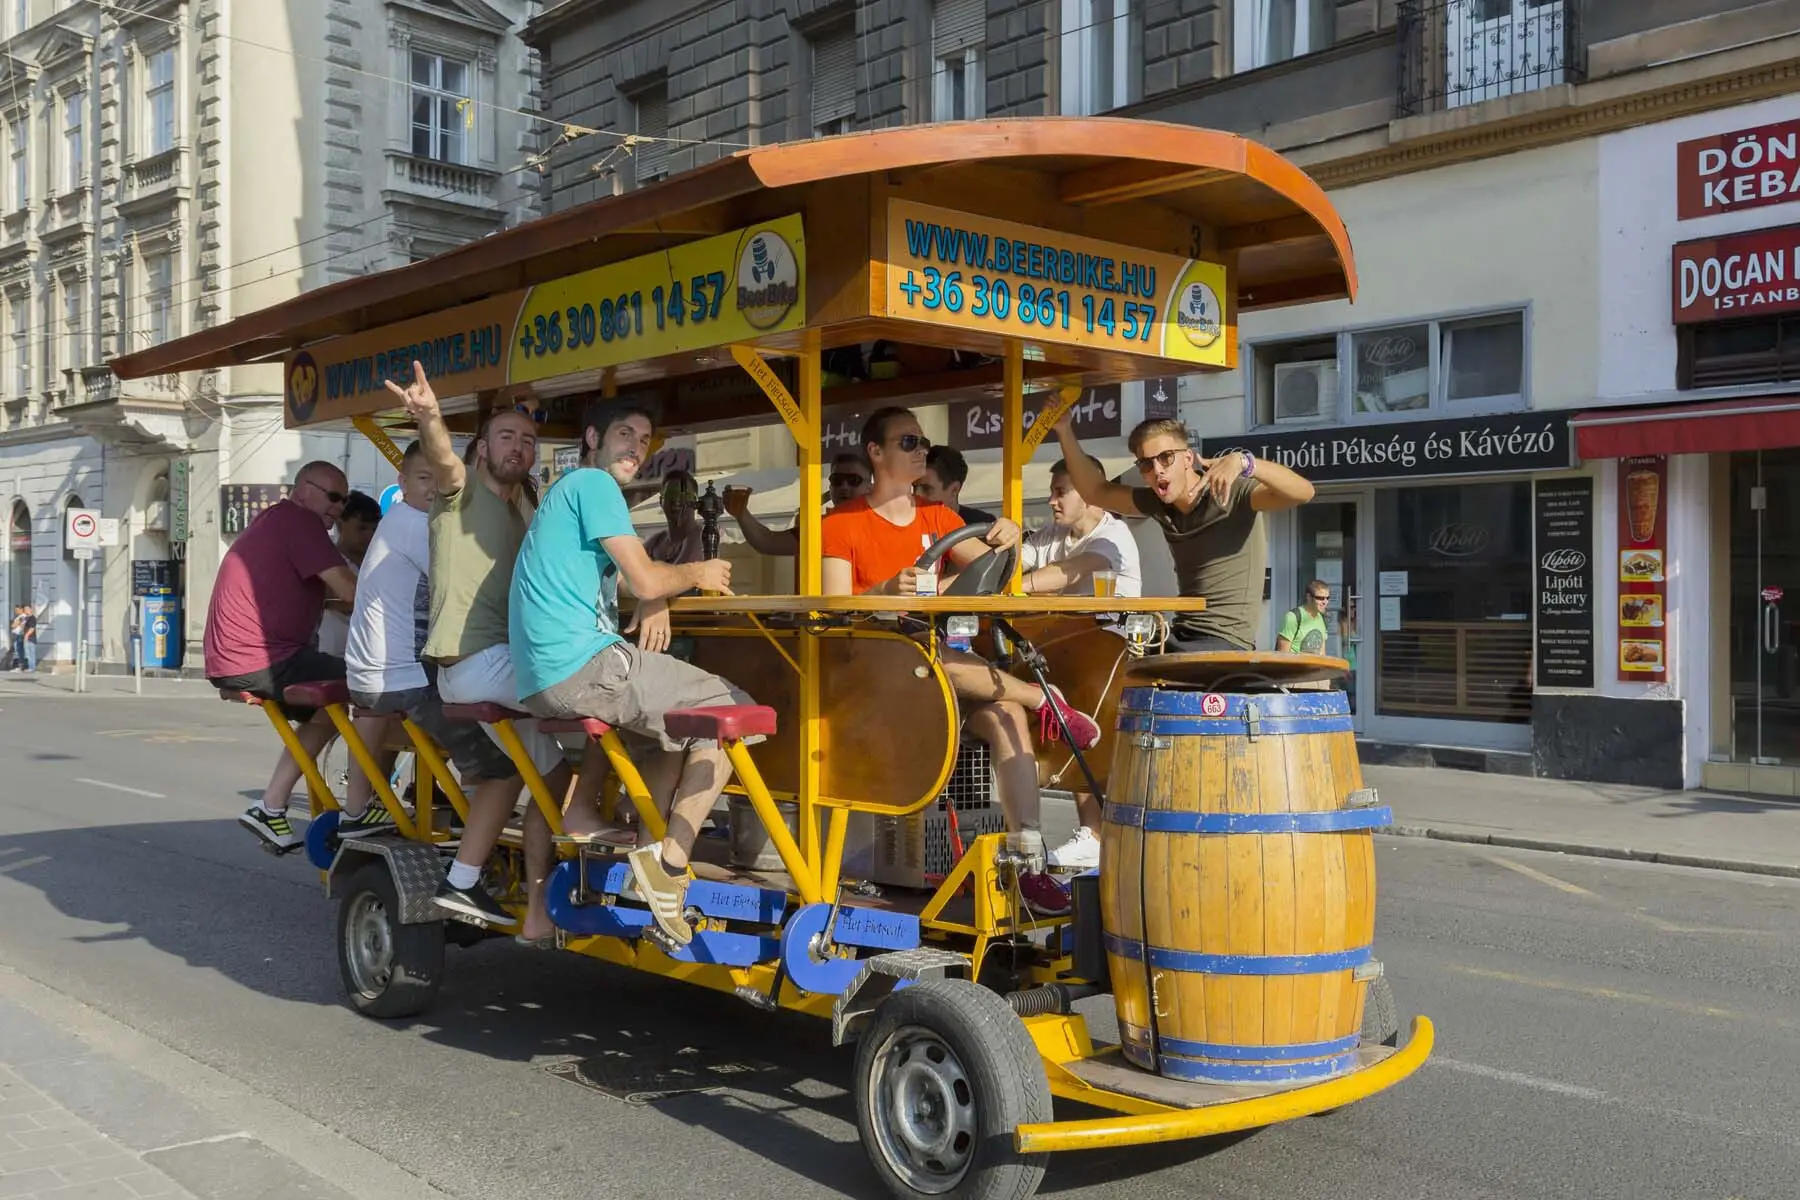 Stag party on a beer bike in Budapest